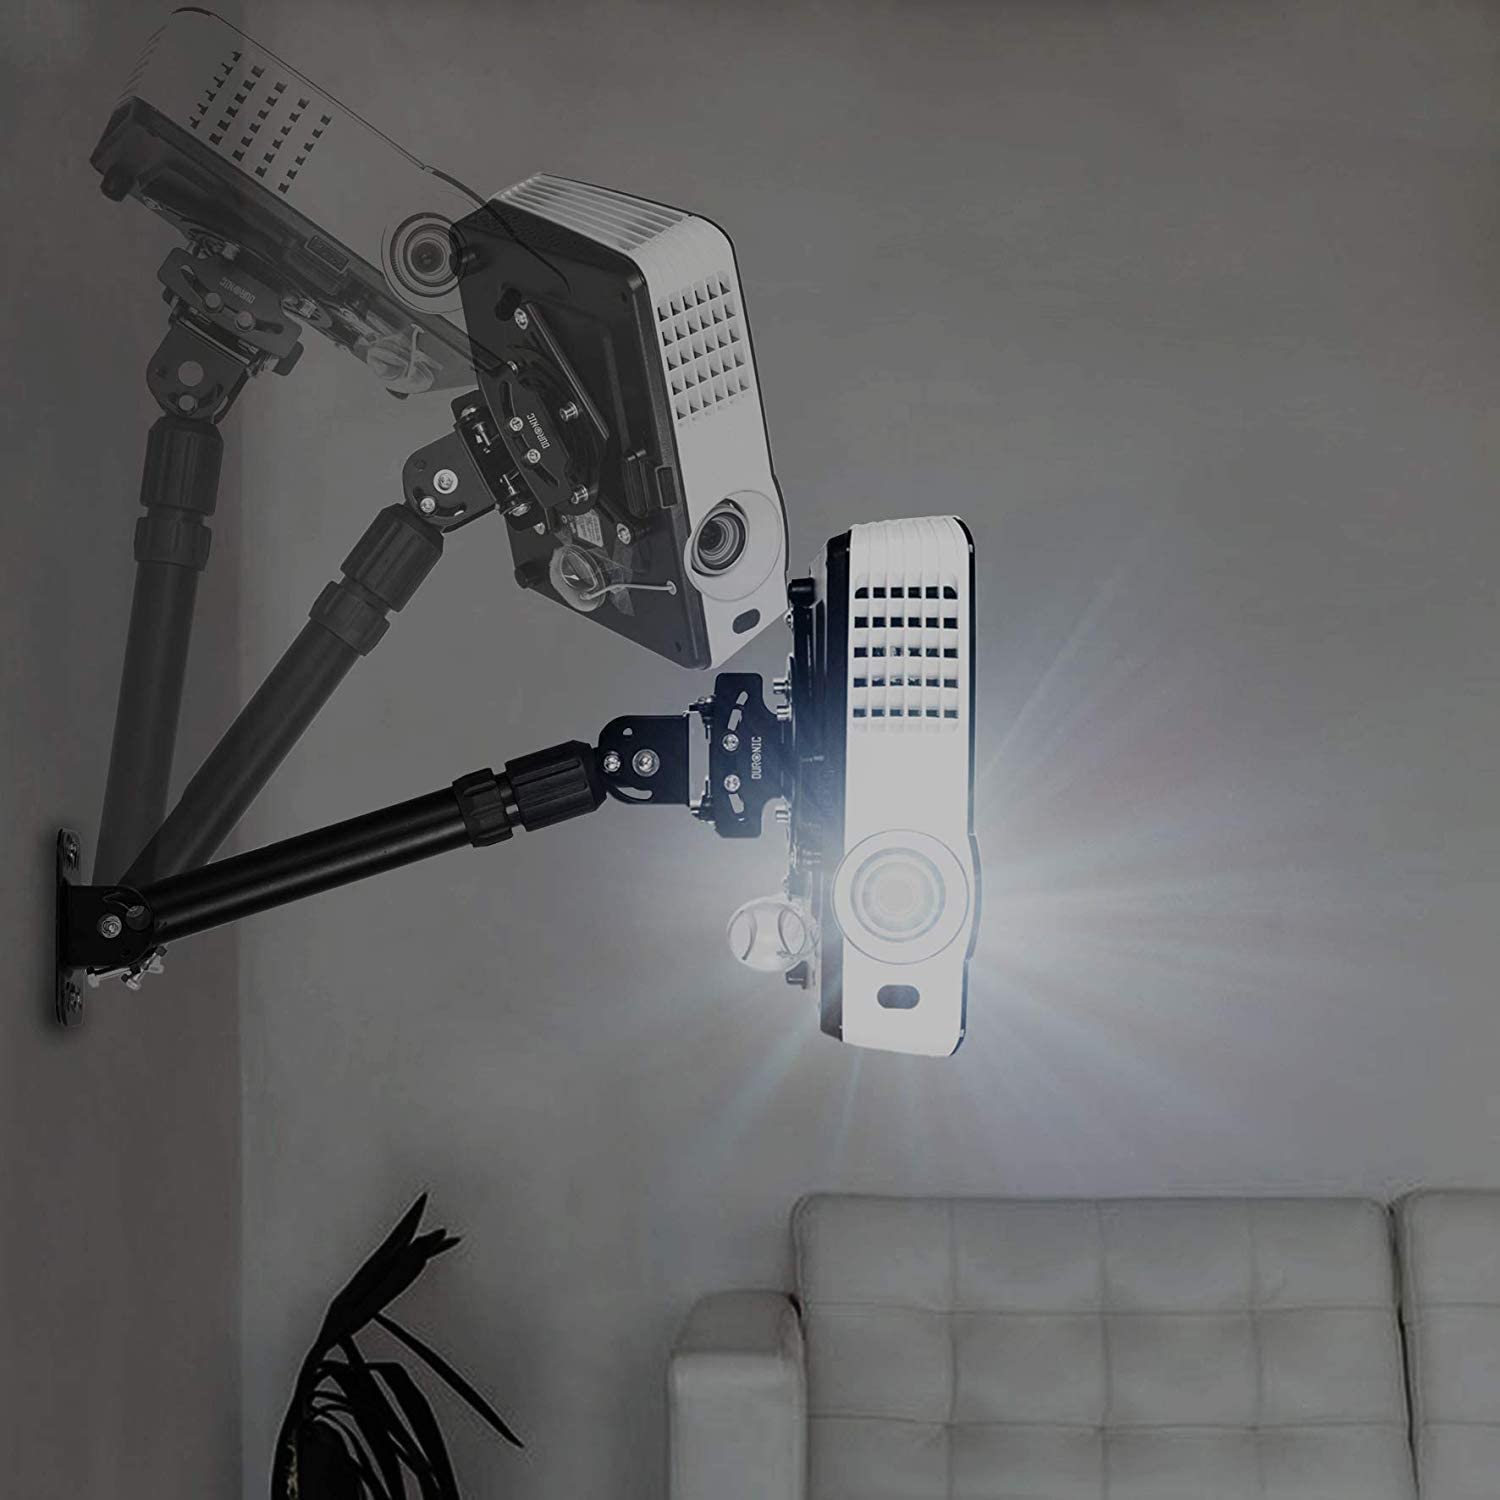 Duronic PB04XL Projector Mount | Projector Ceiling Mount | Universal Wall Mount | Bracket for Video Projector | Rotatable and Swivelling | Home Cinema | Load Capacity up to 13.6 kg | 360° Rotation